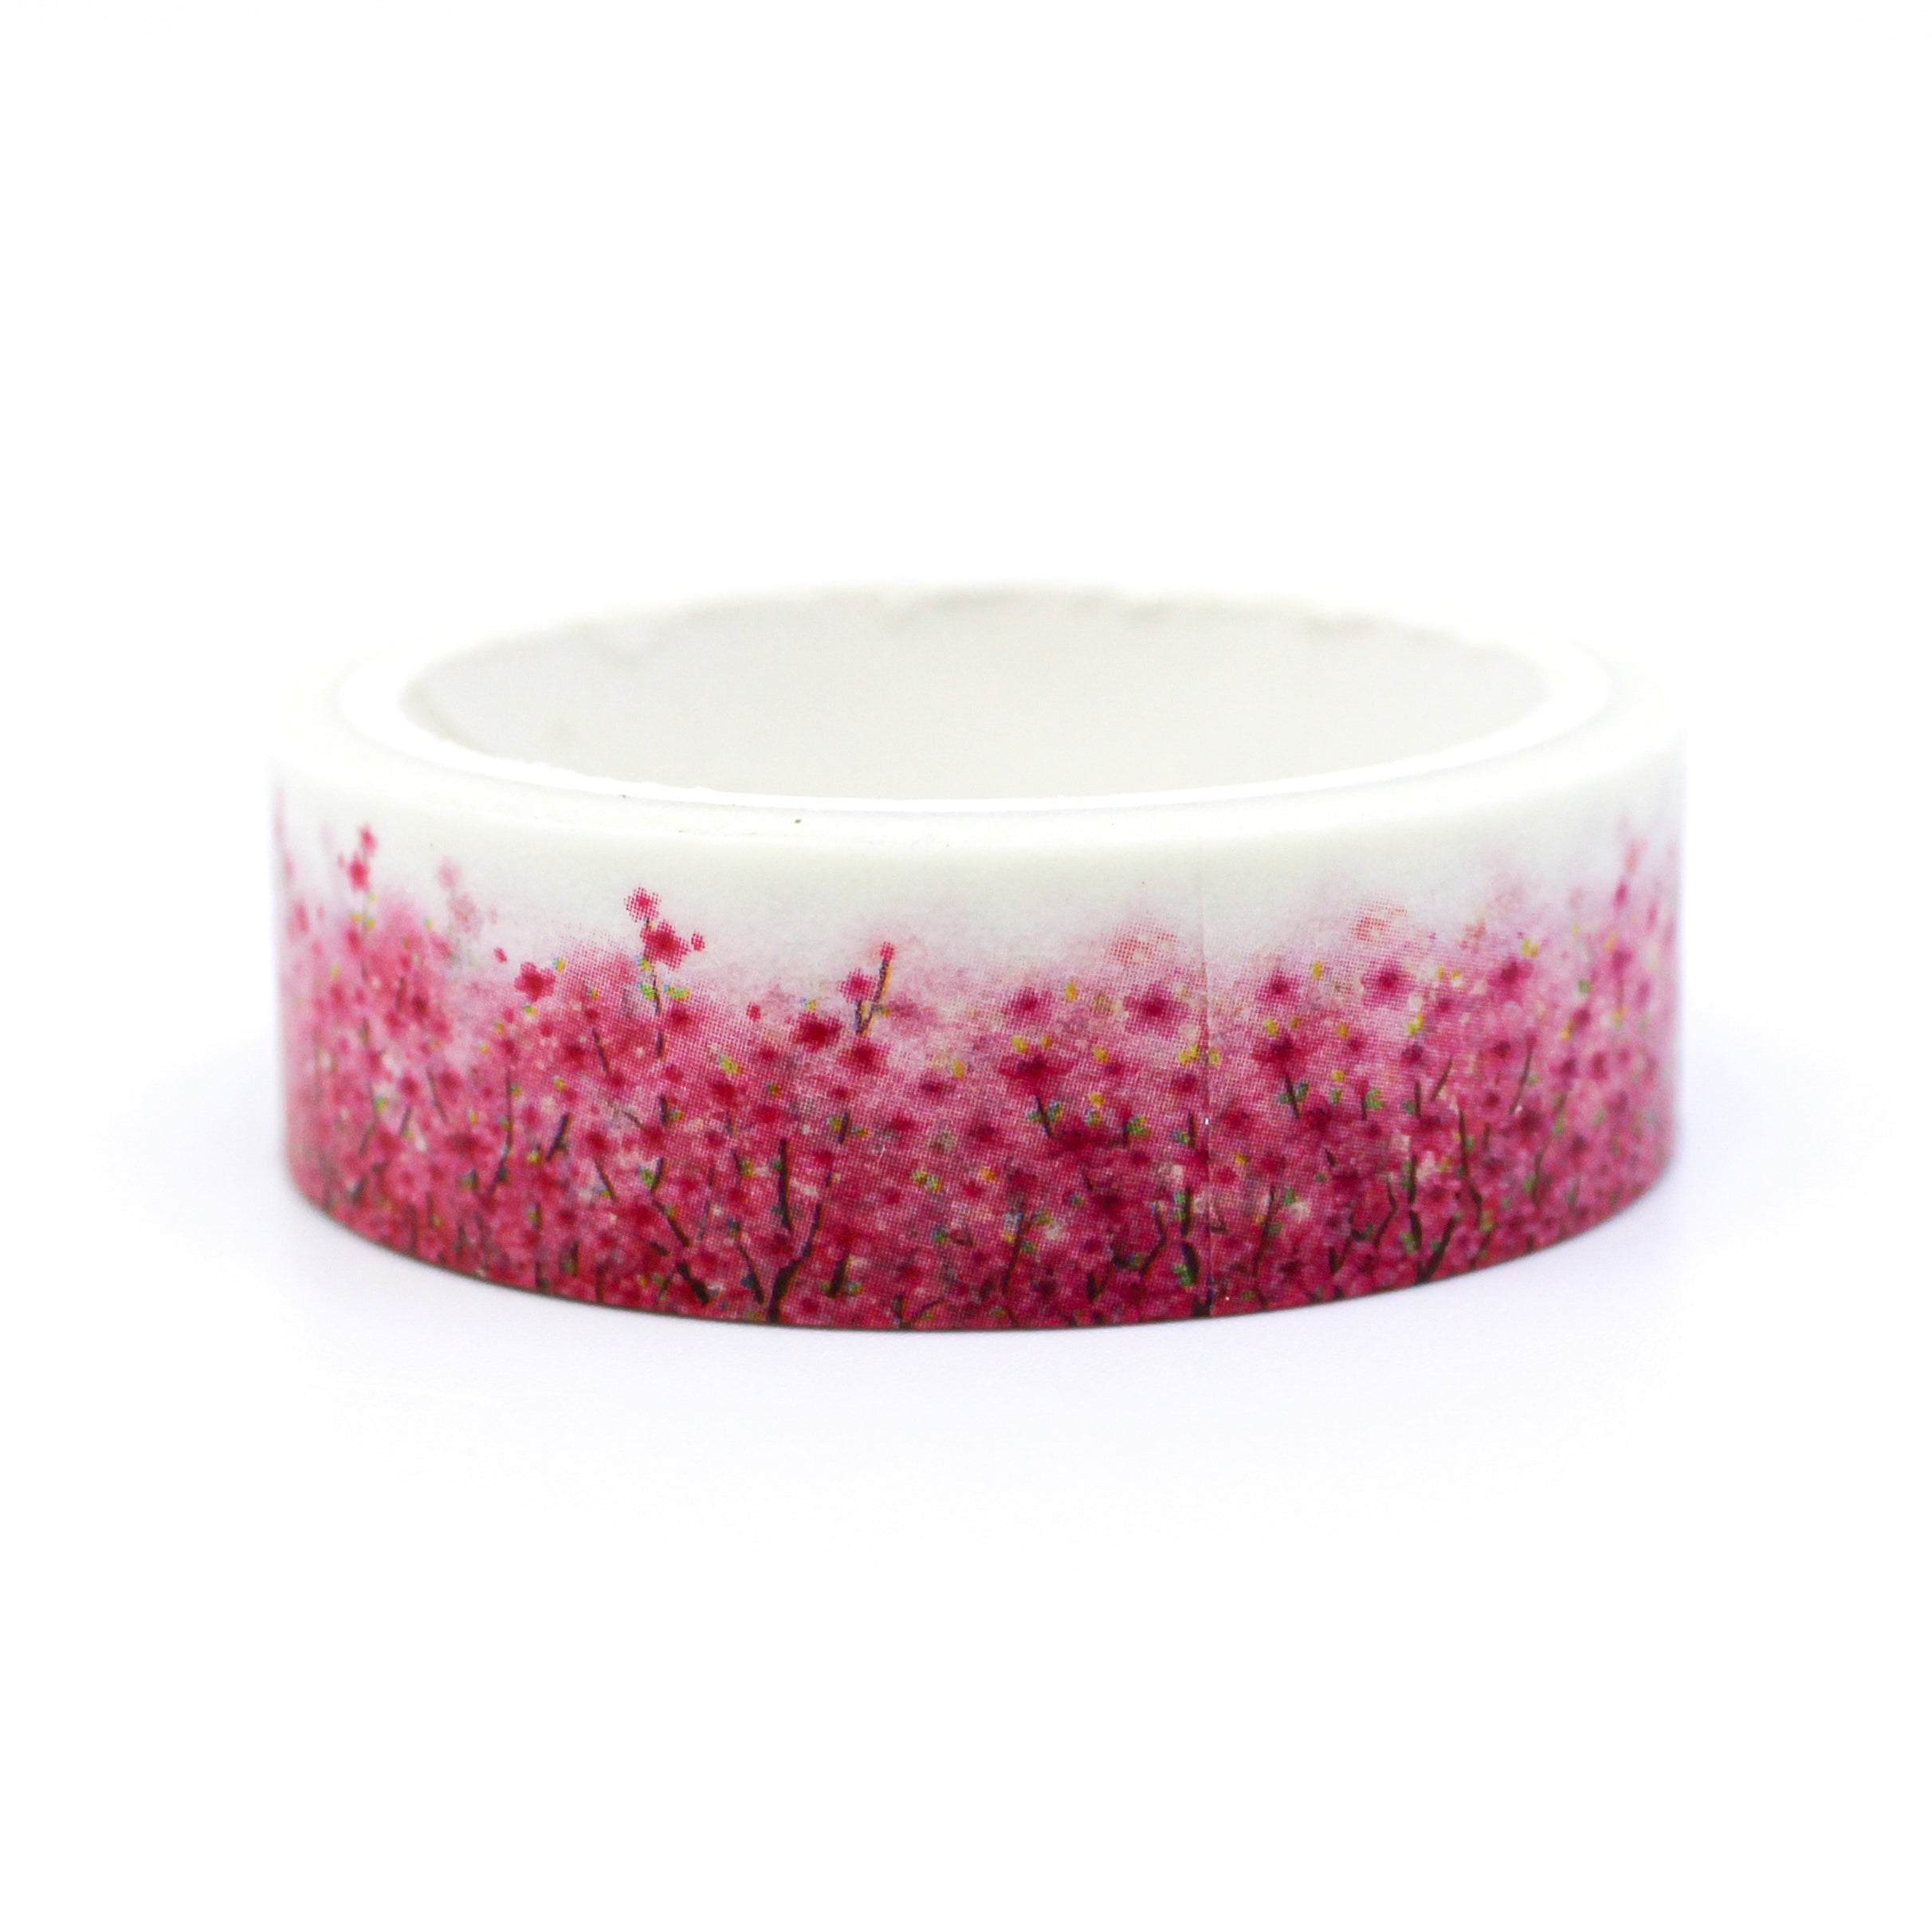 This a cute pink cherry blossoms washi tape from BBB Supplies Craft Shop